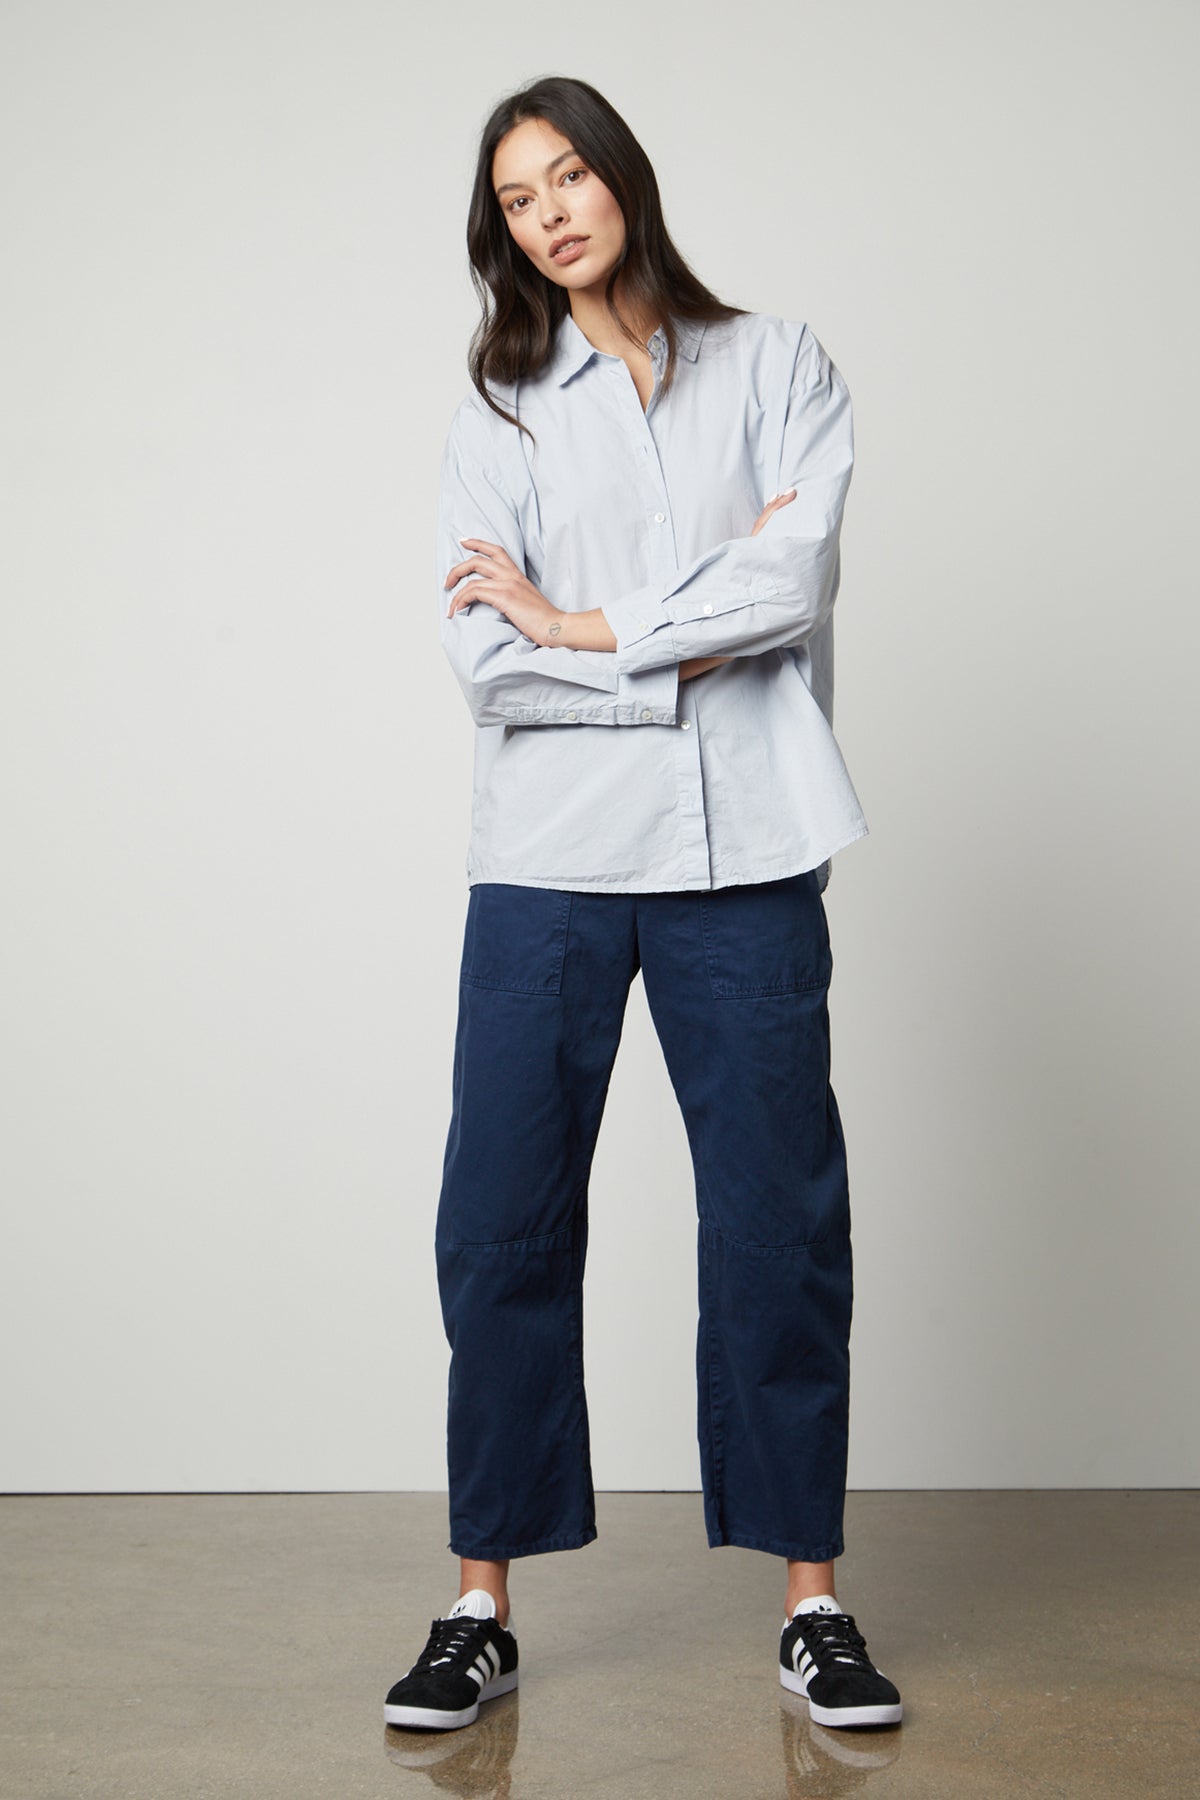   The model is wearing a Velvet by Graham & Spencer BRYLIE SANDED TWILL UTILITY PANT and blue shirt. 